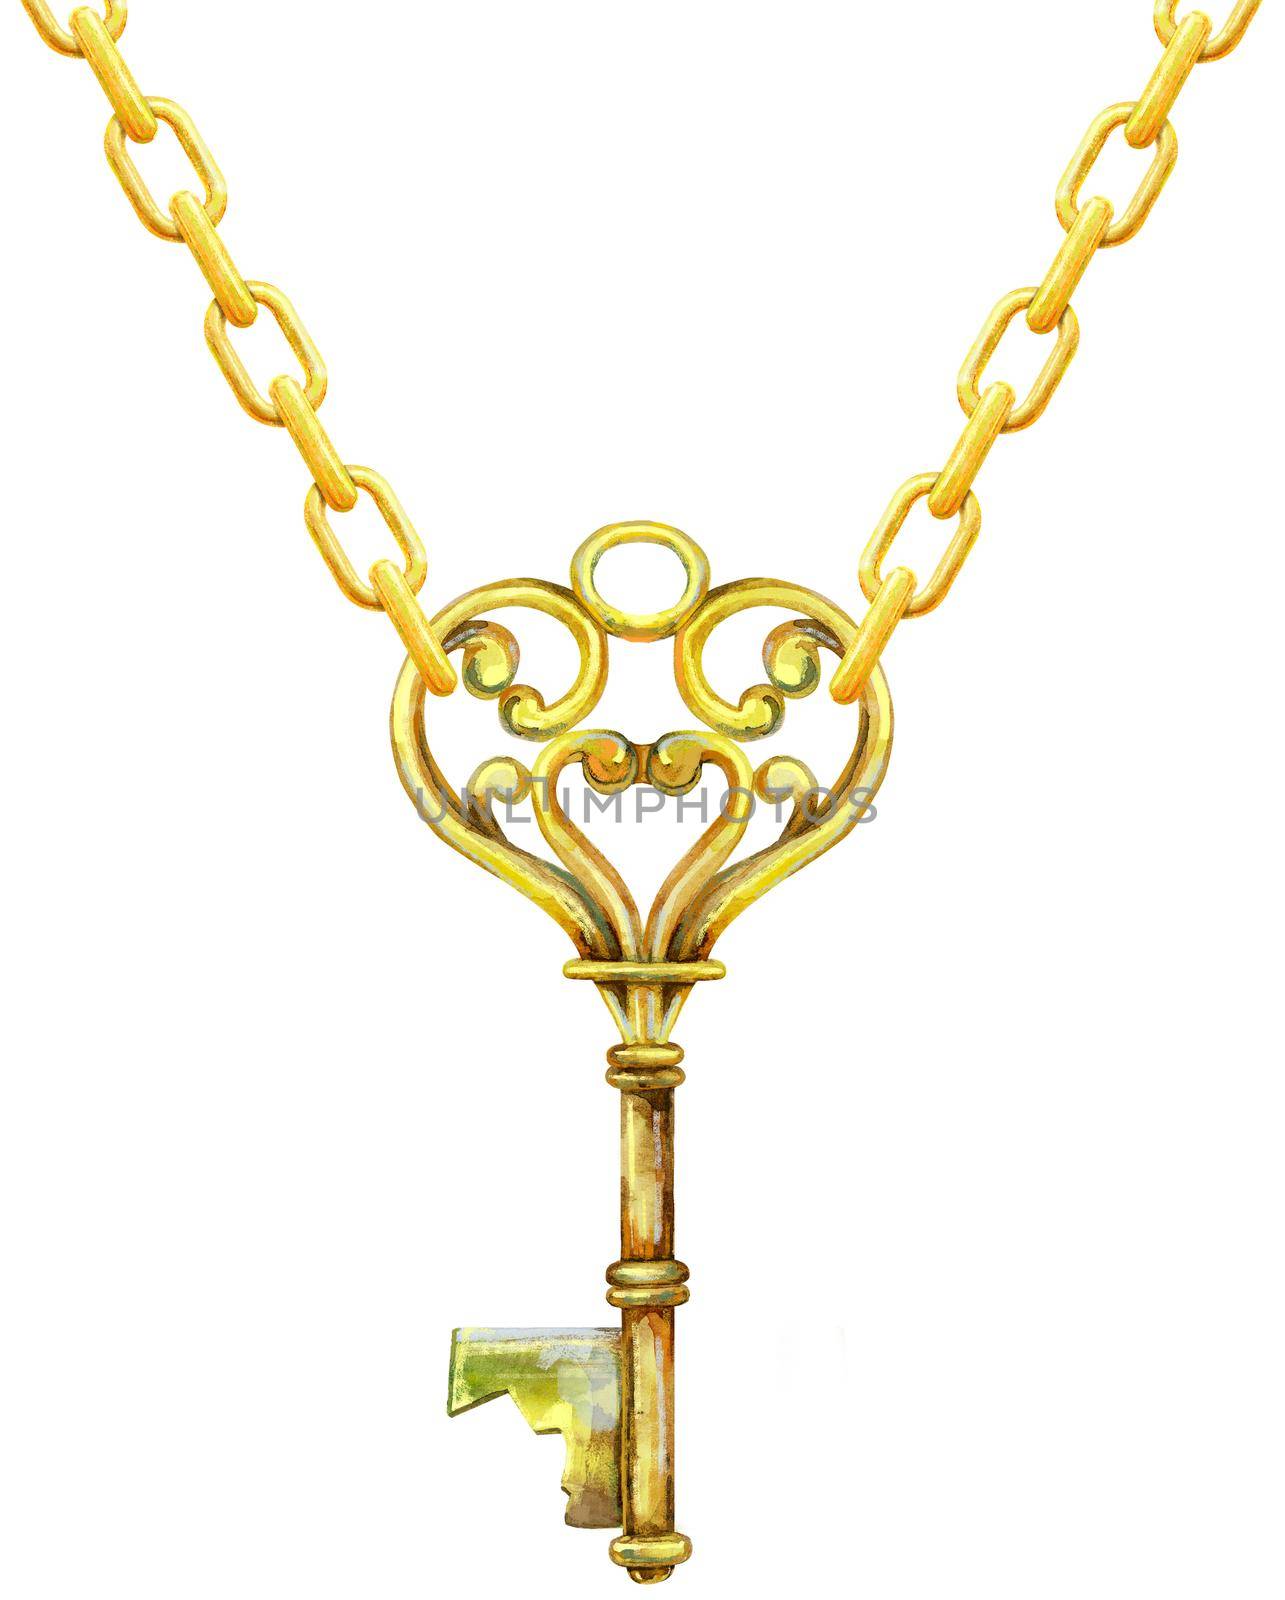 Golden Key on a chain. Watercolor illustration on a white background